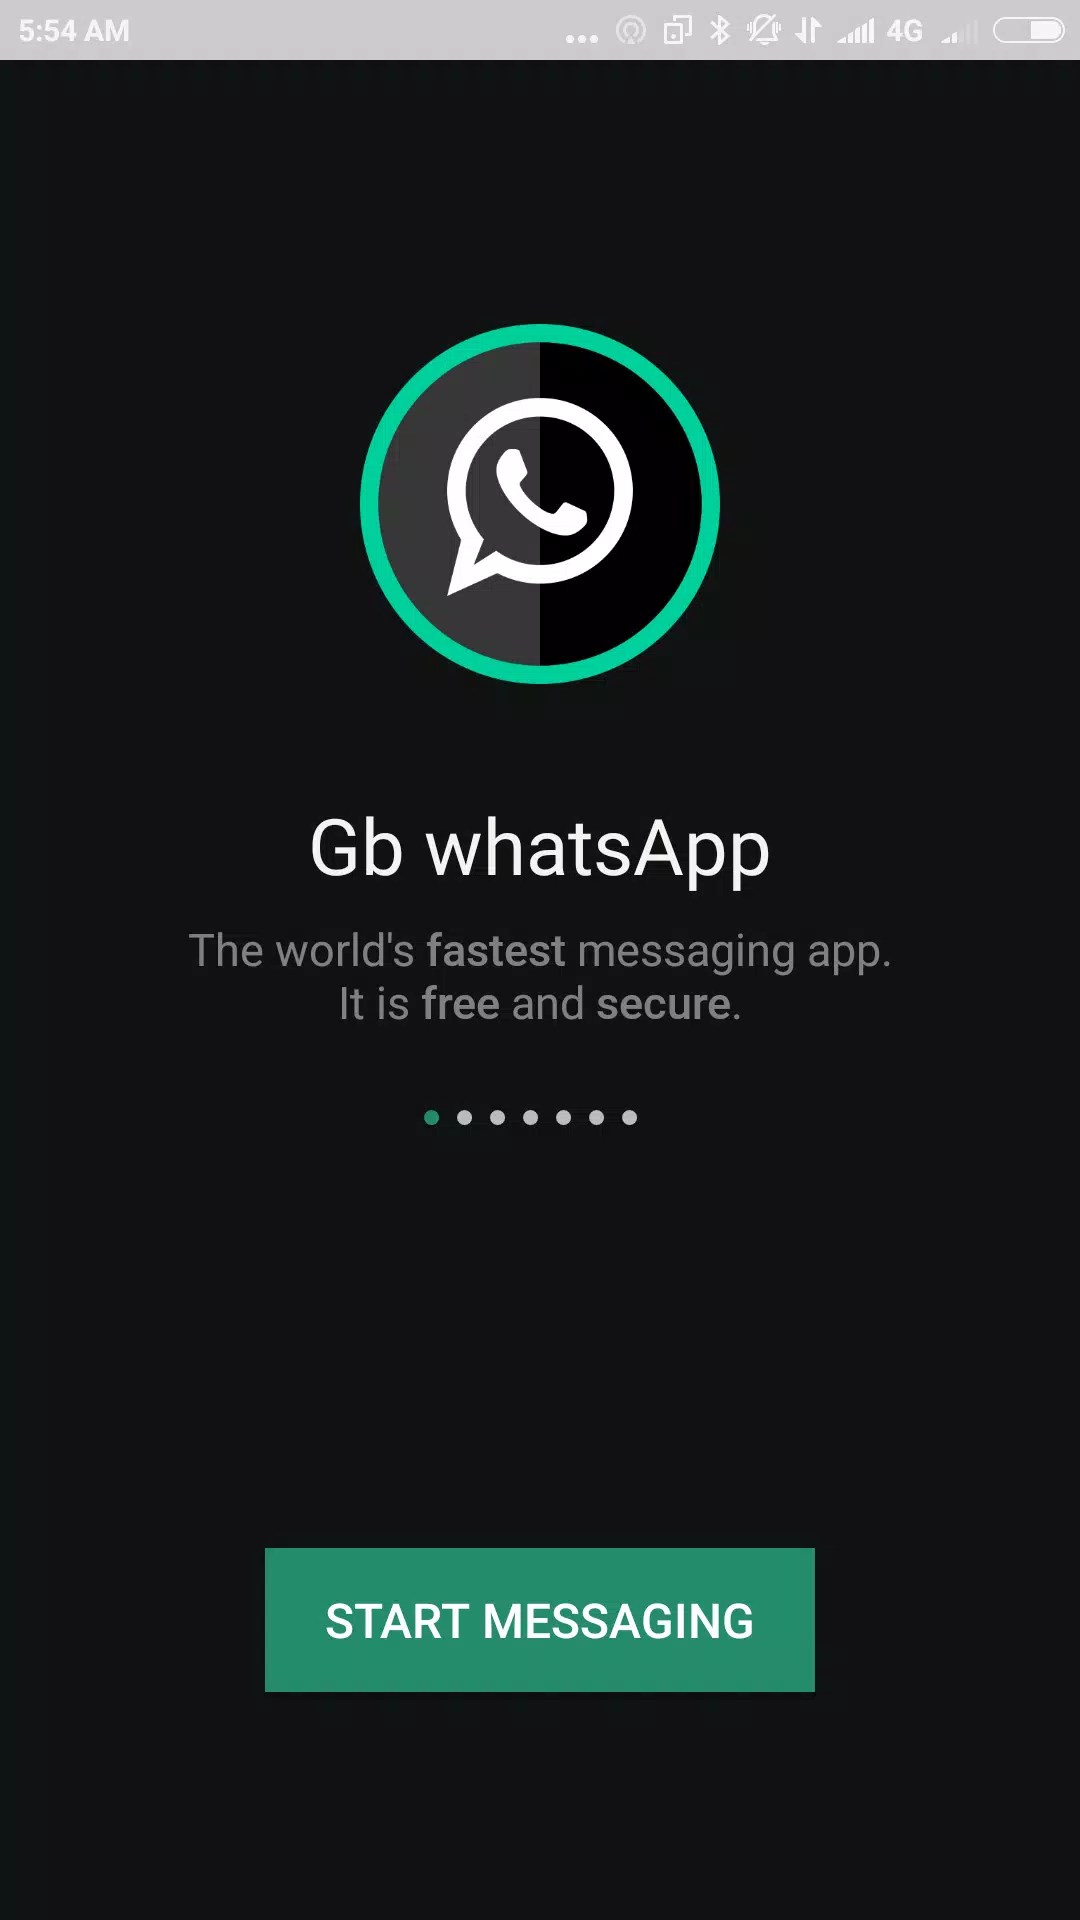 Gb whatsApp for Android - APK Download